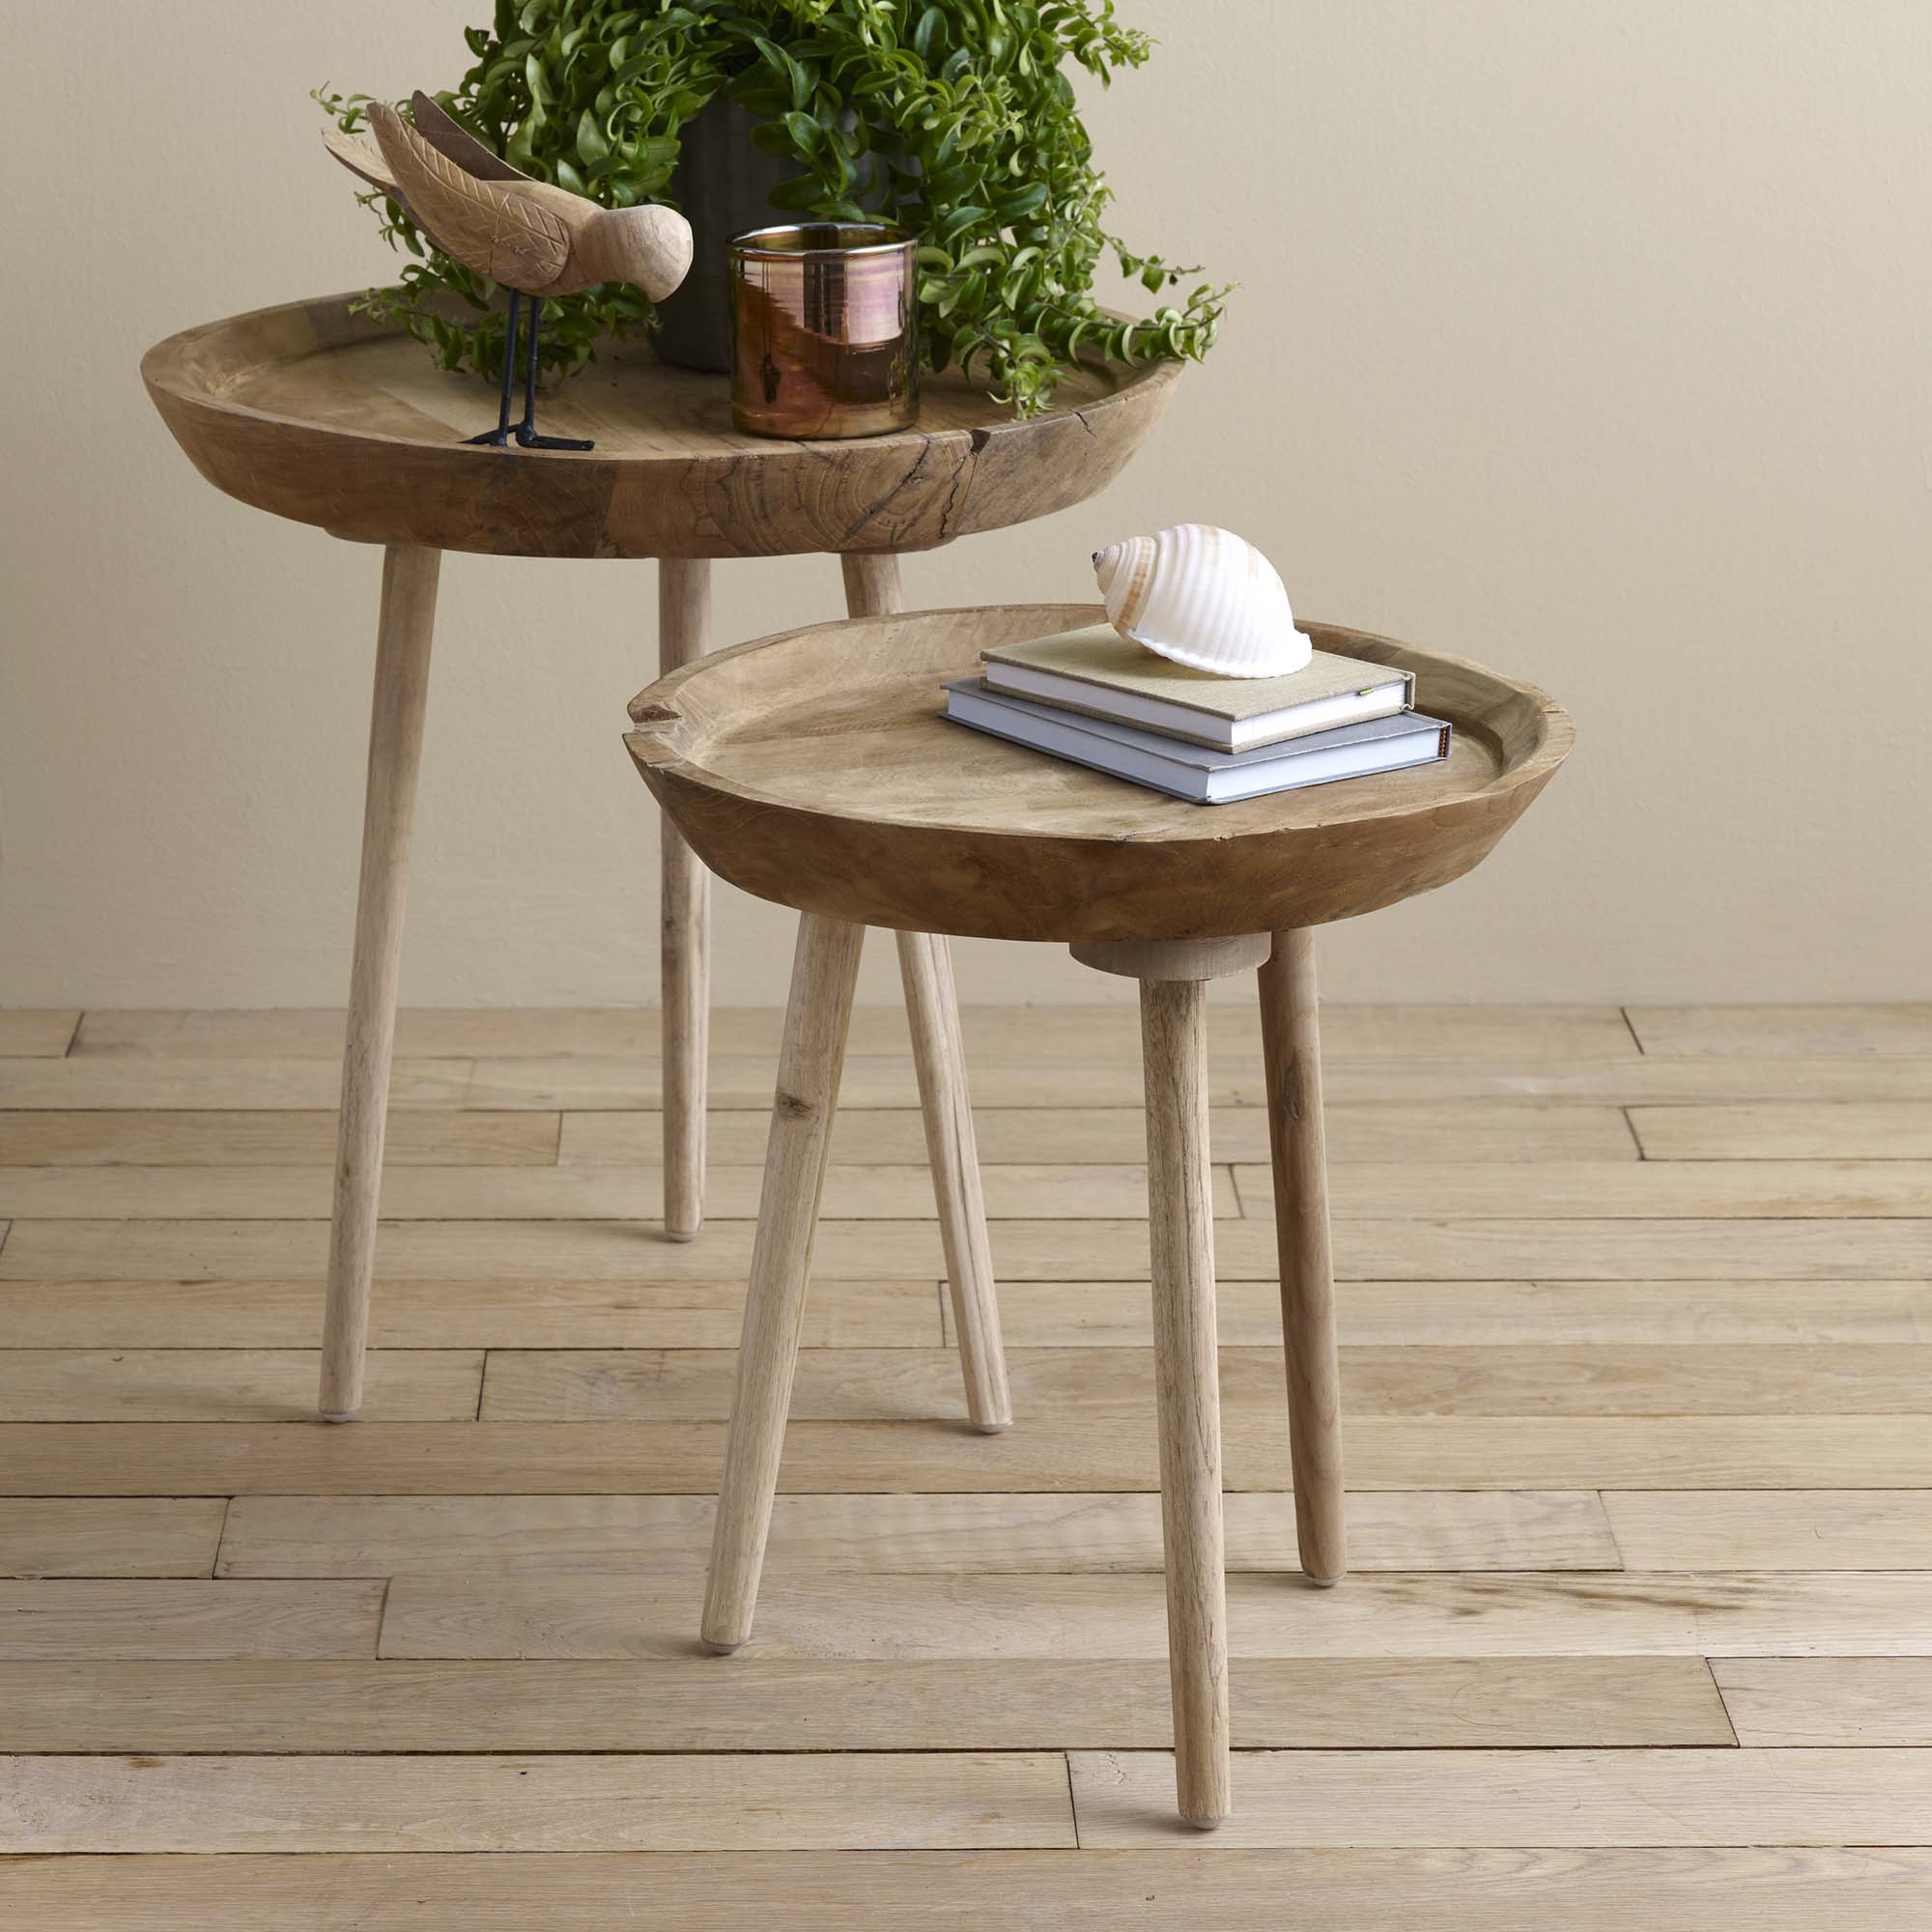 Takara Teak Round Table (Short) Silver Color | Image 3 | From the Takara Collection | Masterfully assembled with natural teak for long lasting use | This table is sustainably sourced | Available in natural color | texxture home